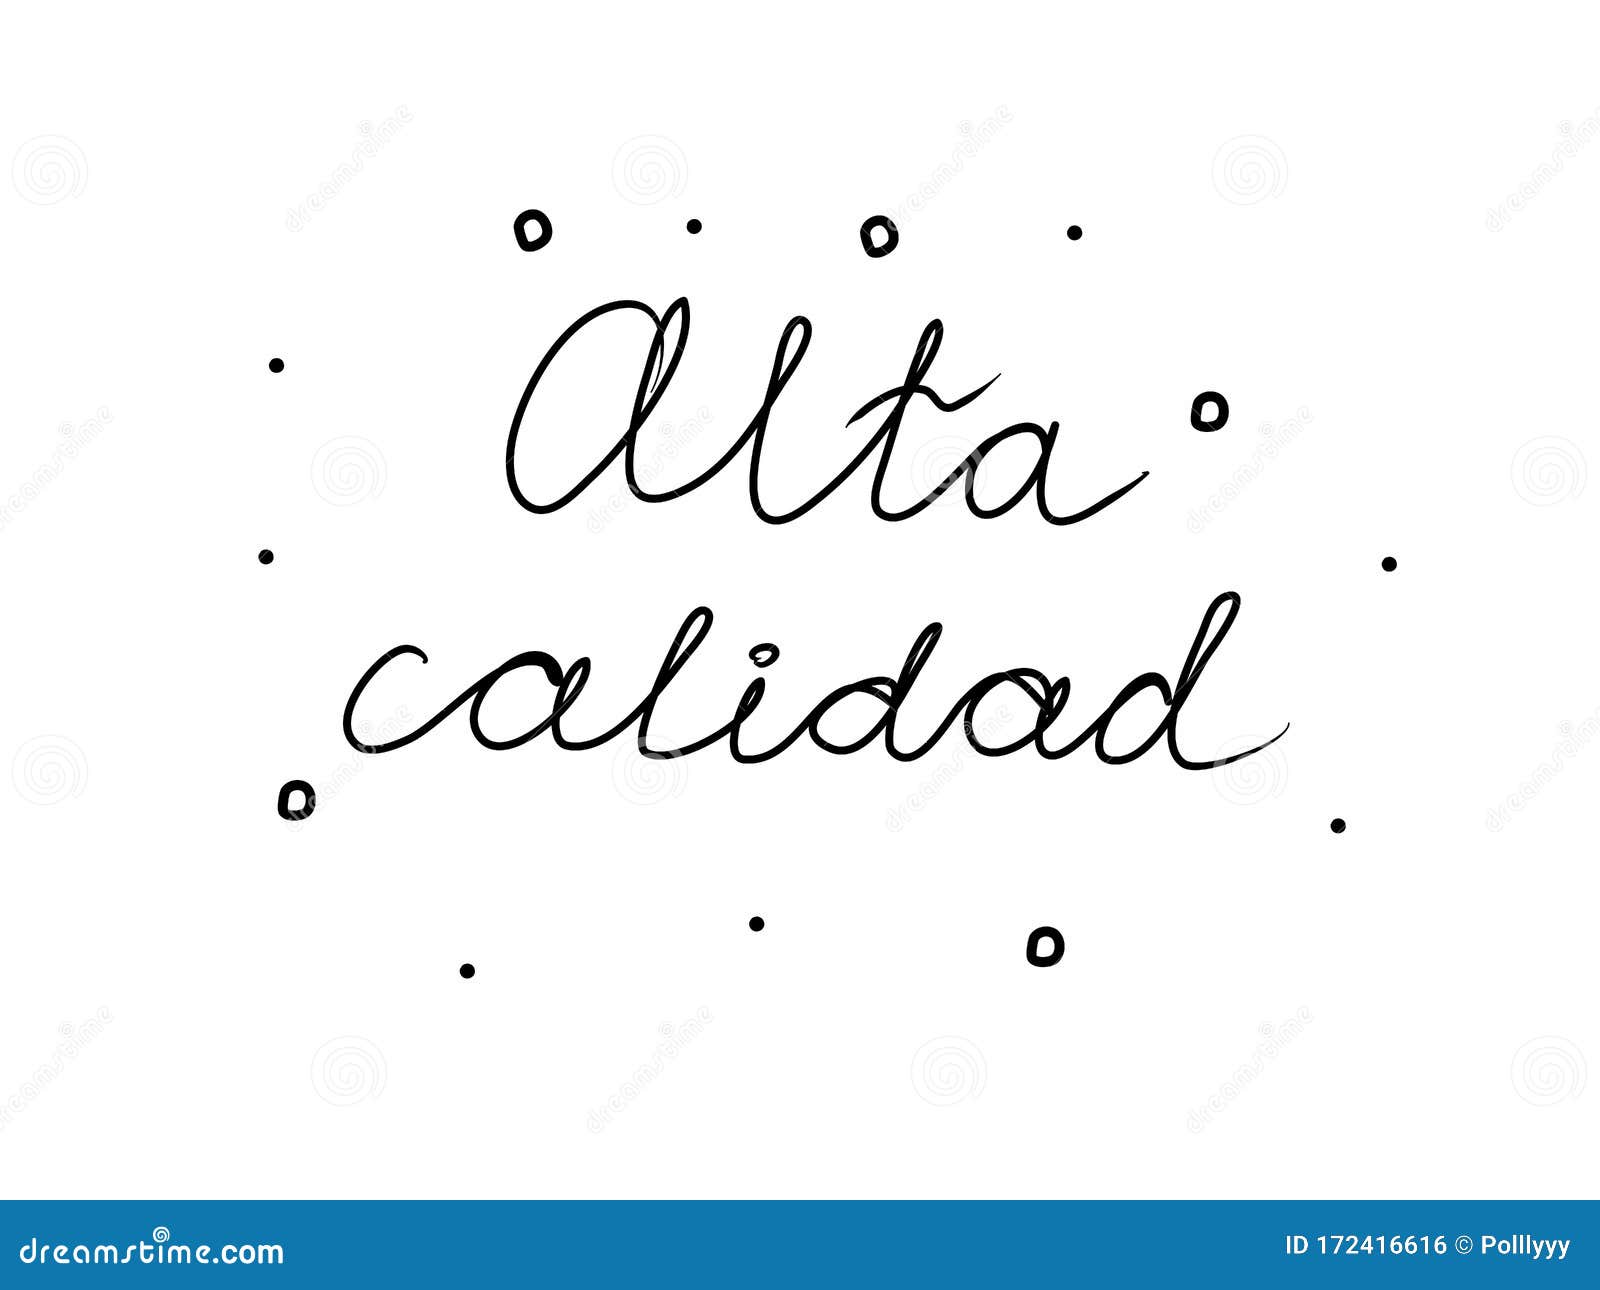 alta calidad phrase handwritten with a calligraphy brush. high quality in spanish. modern brush calligraphy.  word black